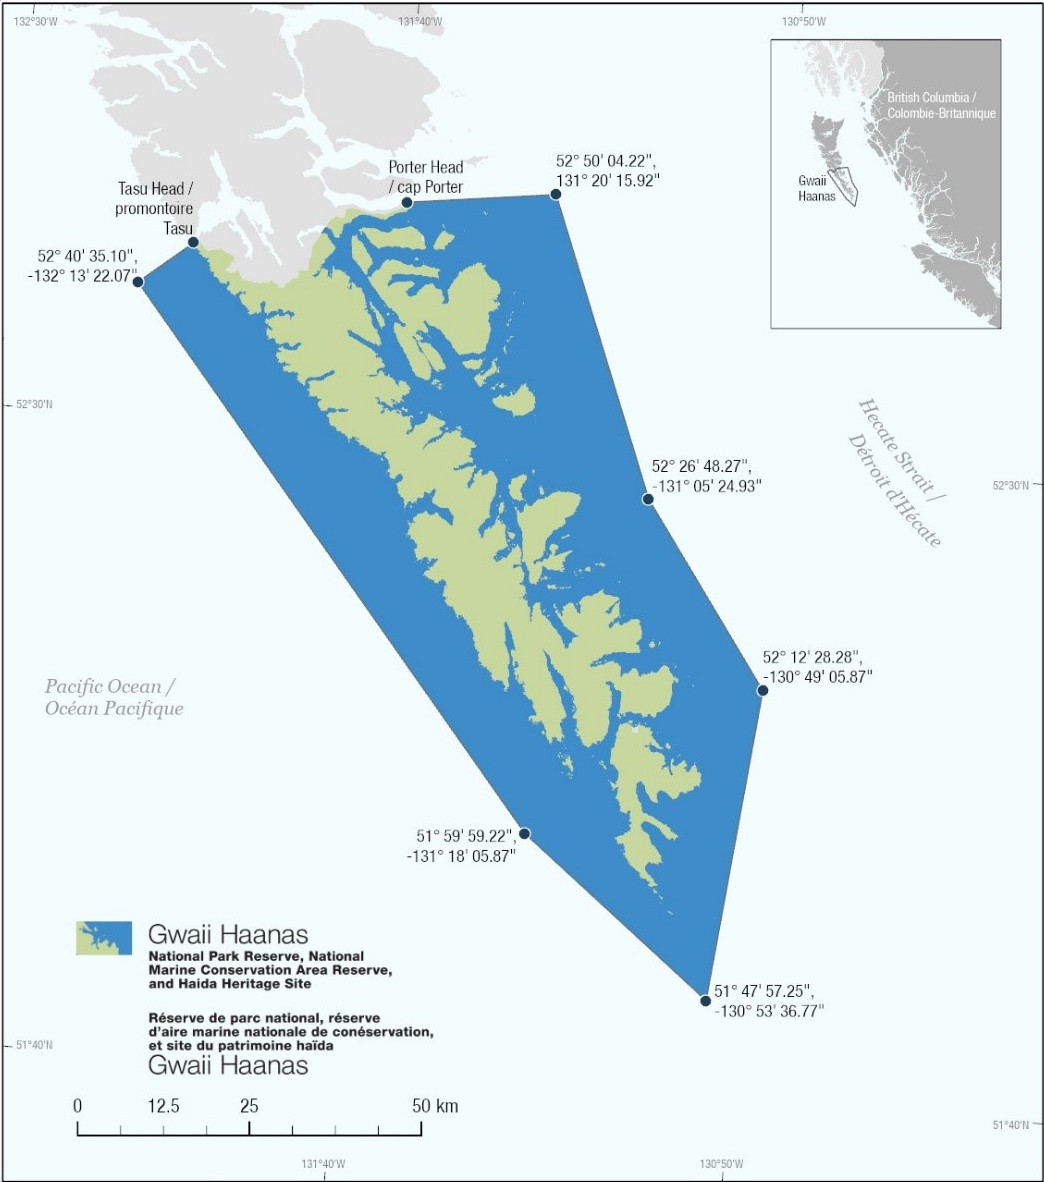 Map showing with coordinate points Gwaii Haanas National Park Reserve, National Marine Conservation Area Reserve, and Haida Heritage Site.